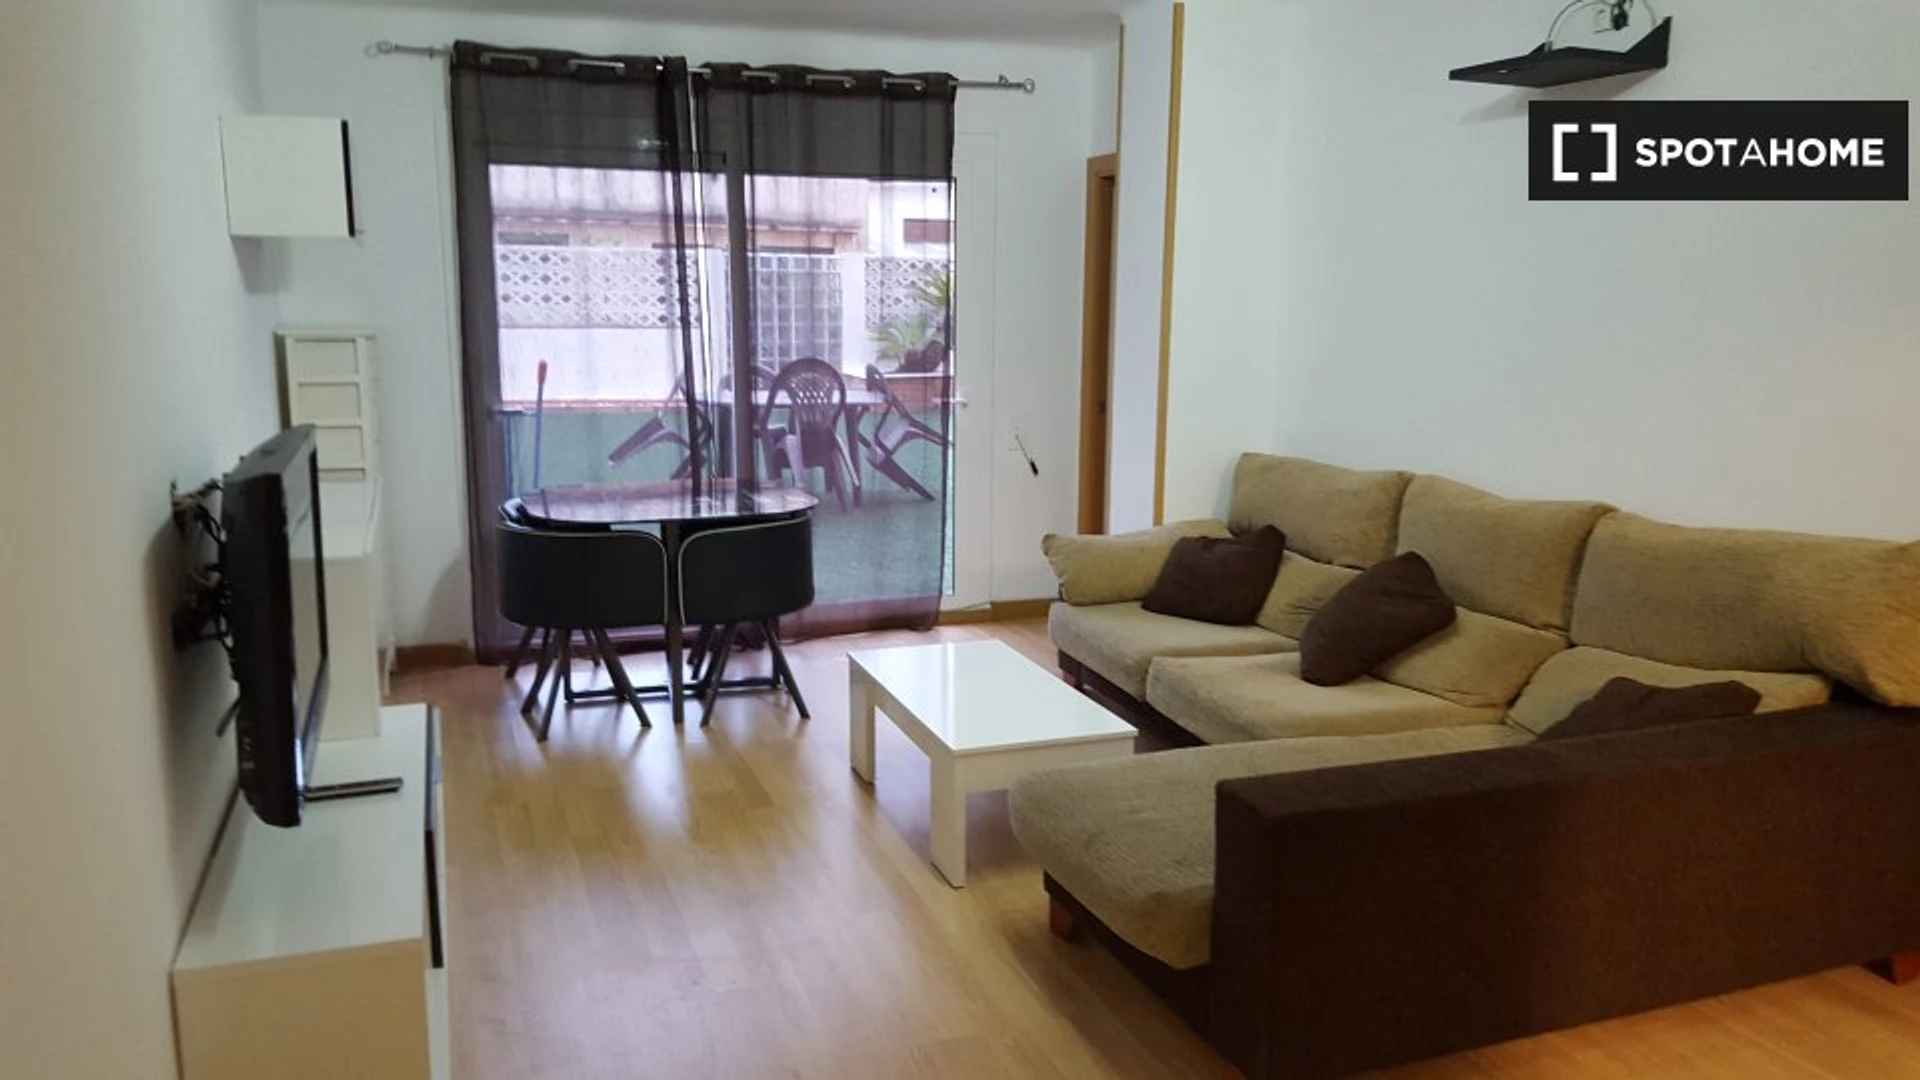 Cheap private room in Mataró